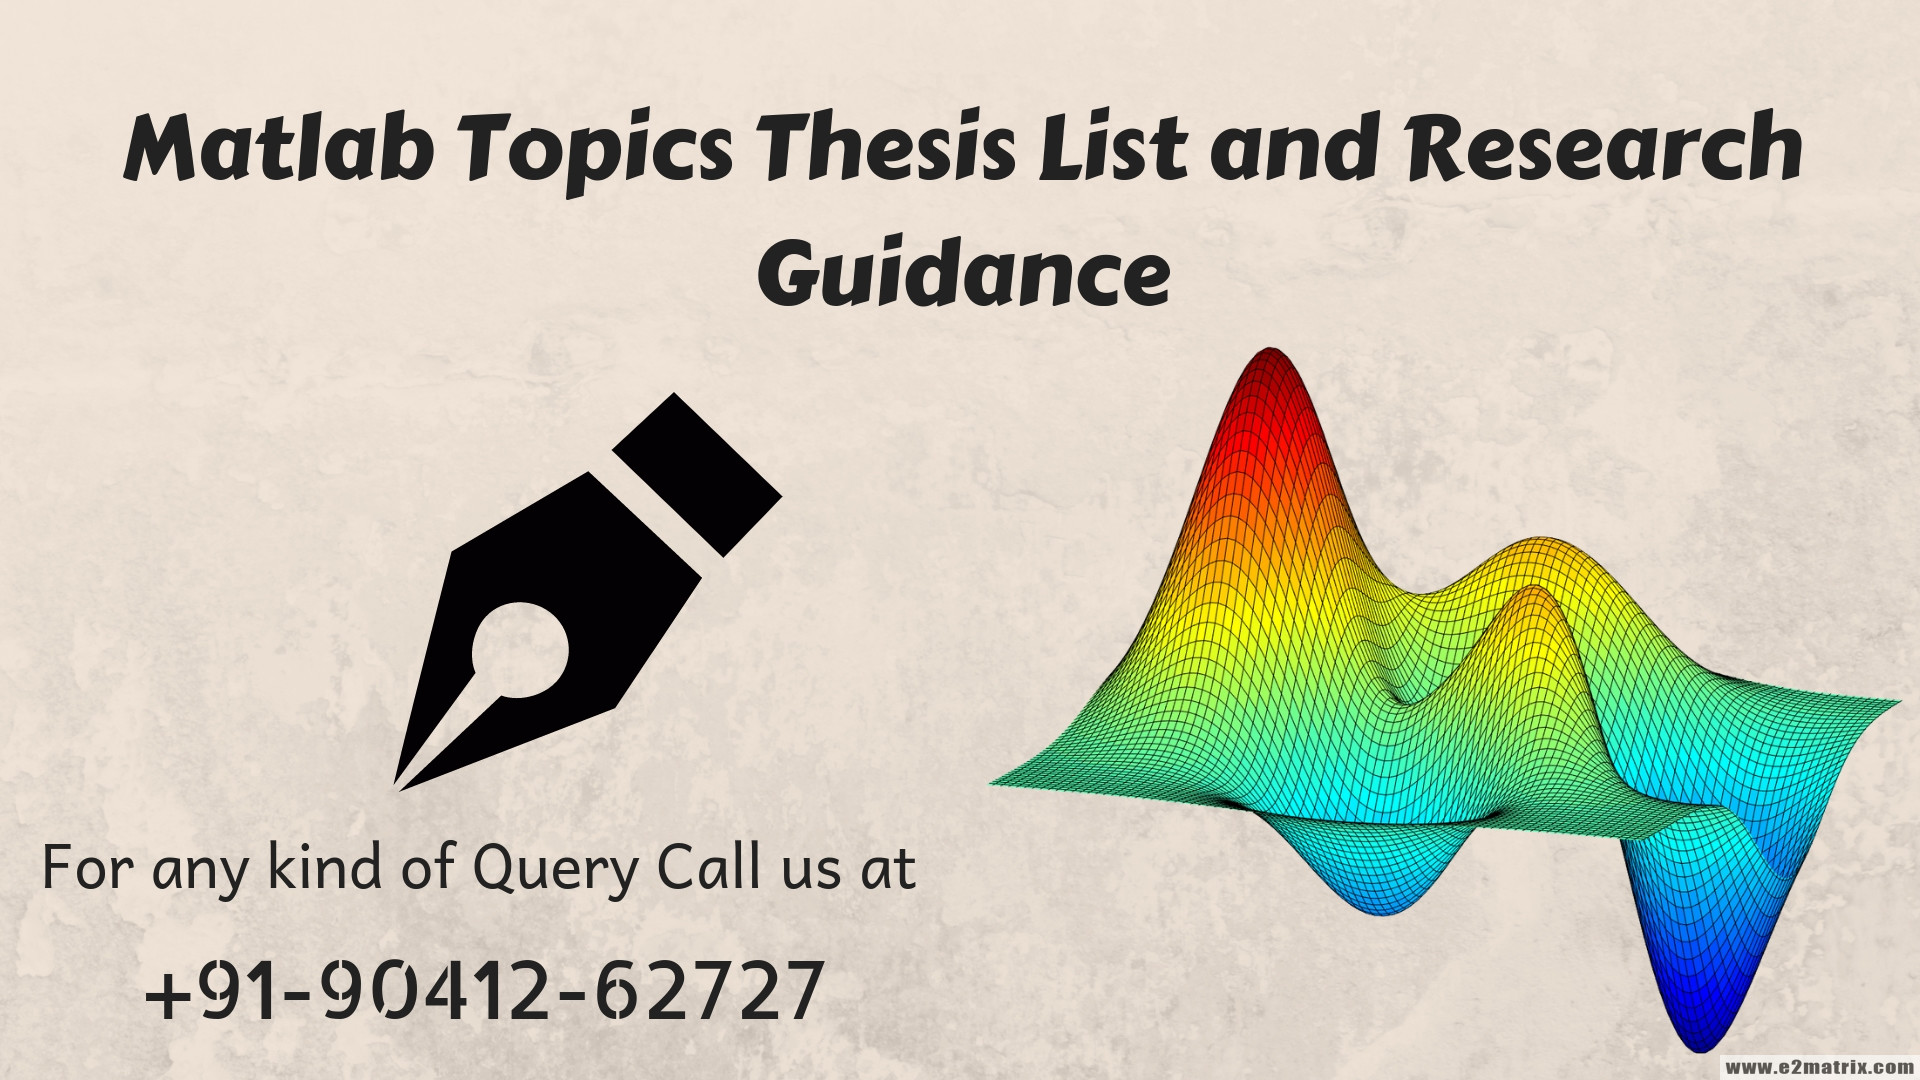 Matlab Topics,Thesis List and Research Guidance